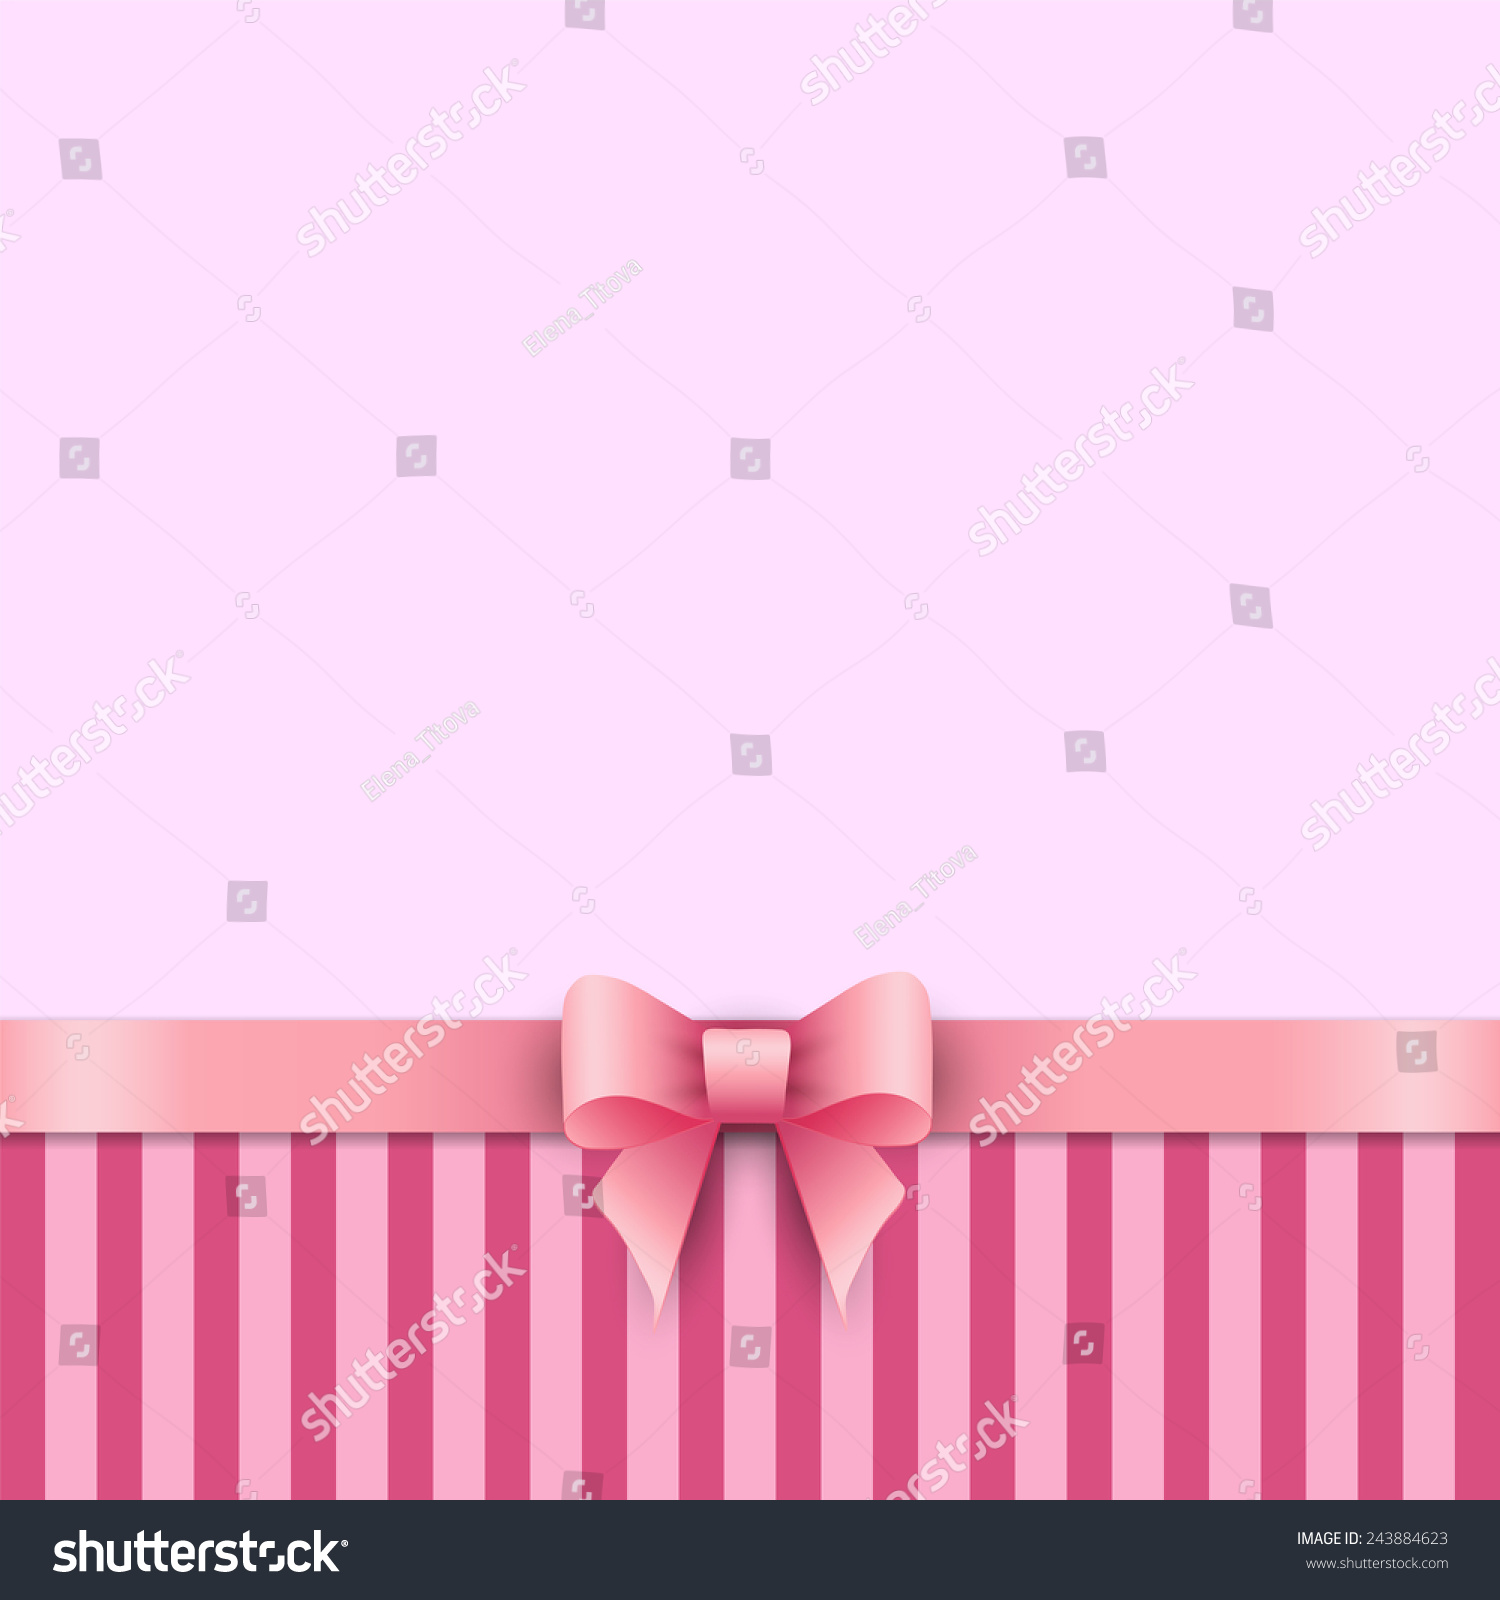 Striped Background With Children'S Pink Bow Stock Vector 243884623 ...